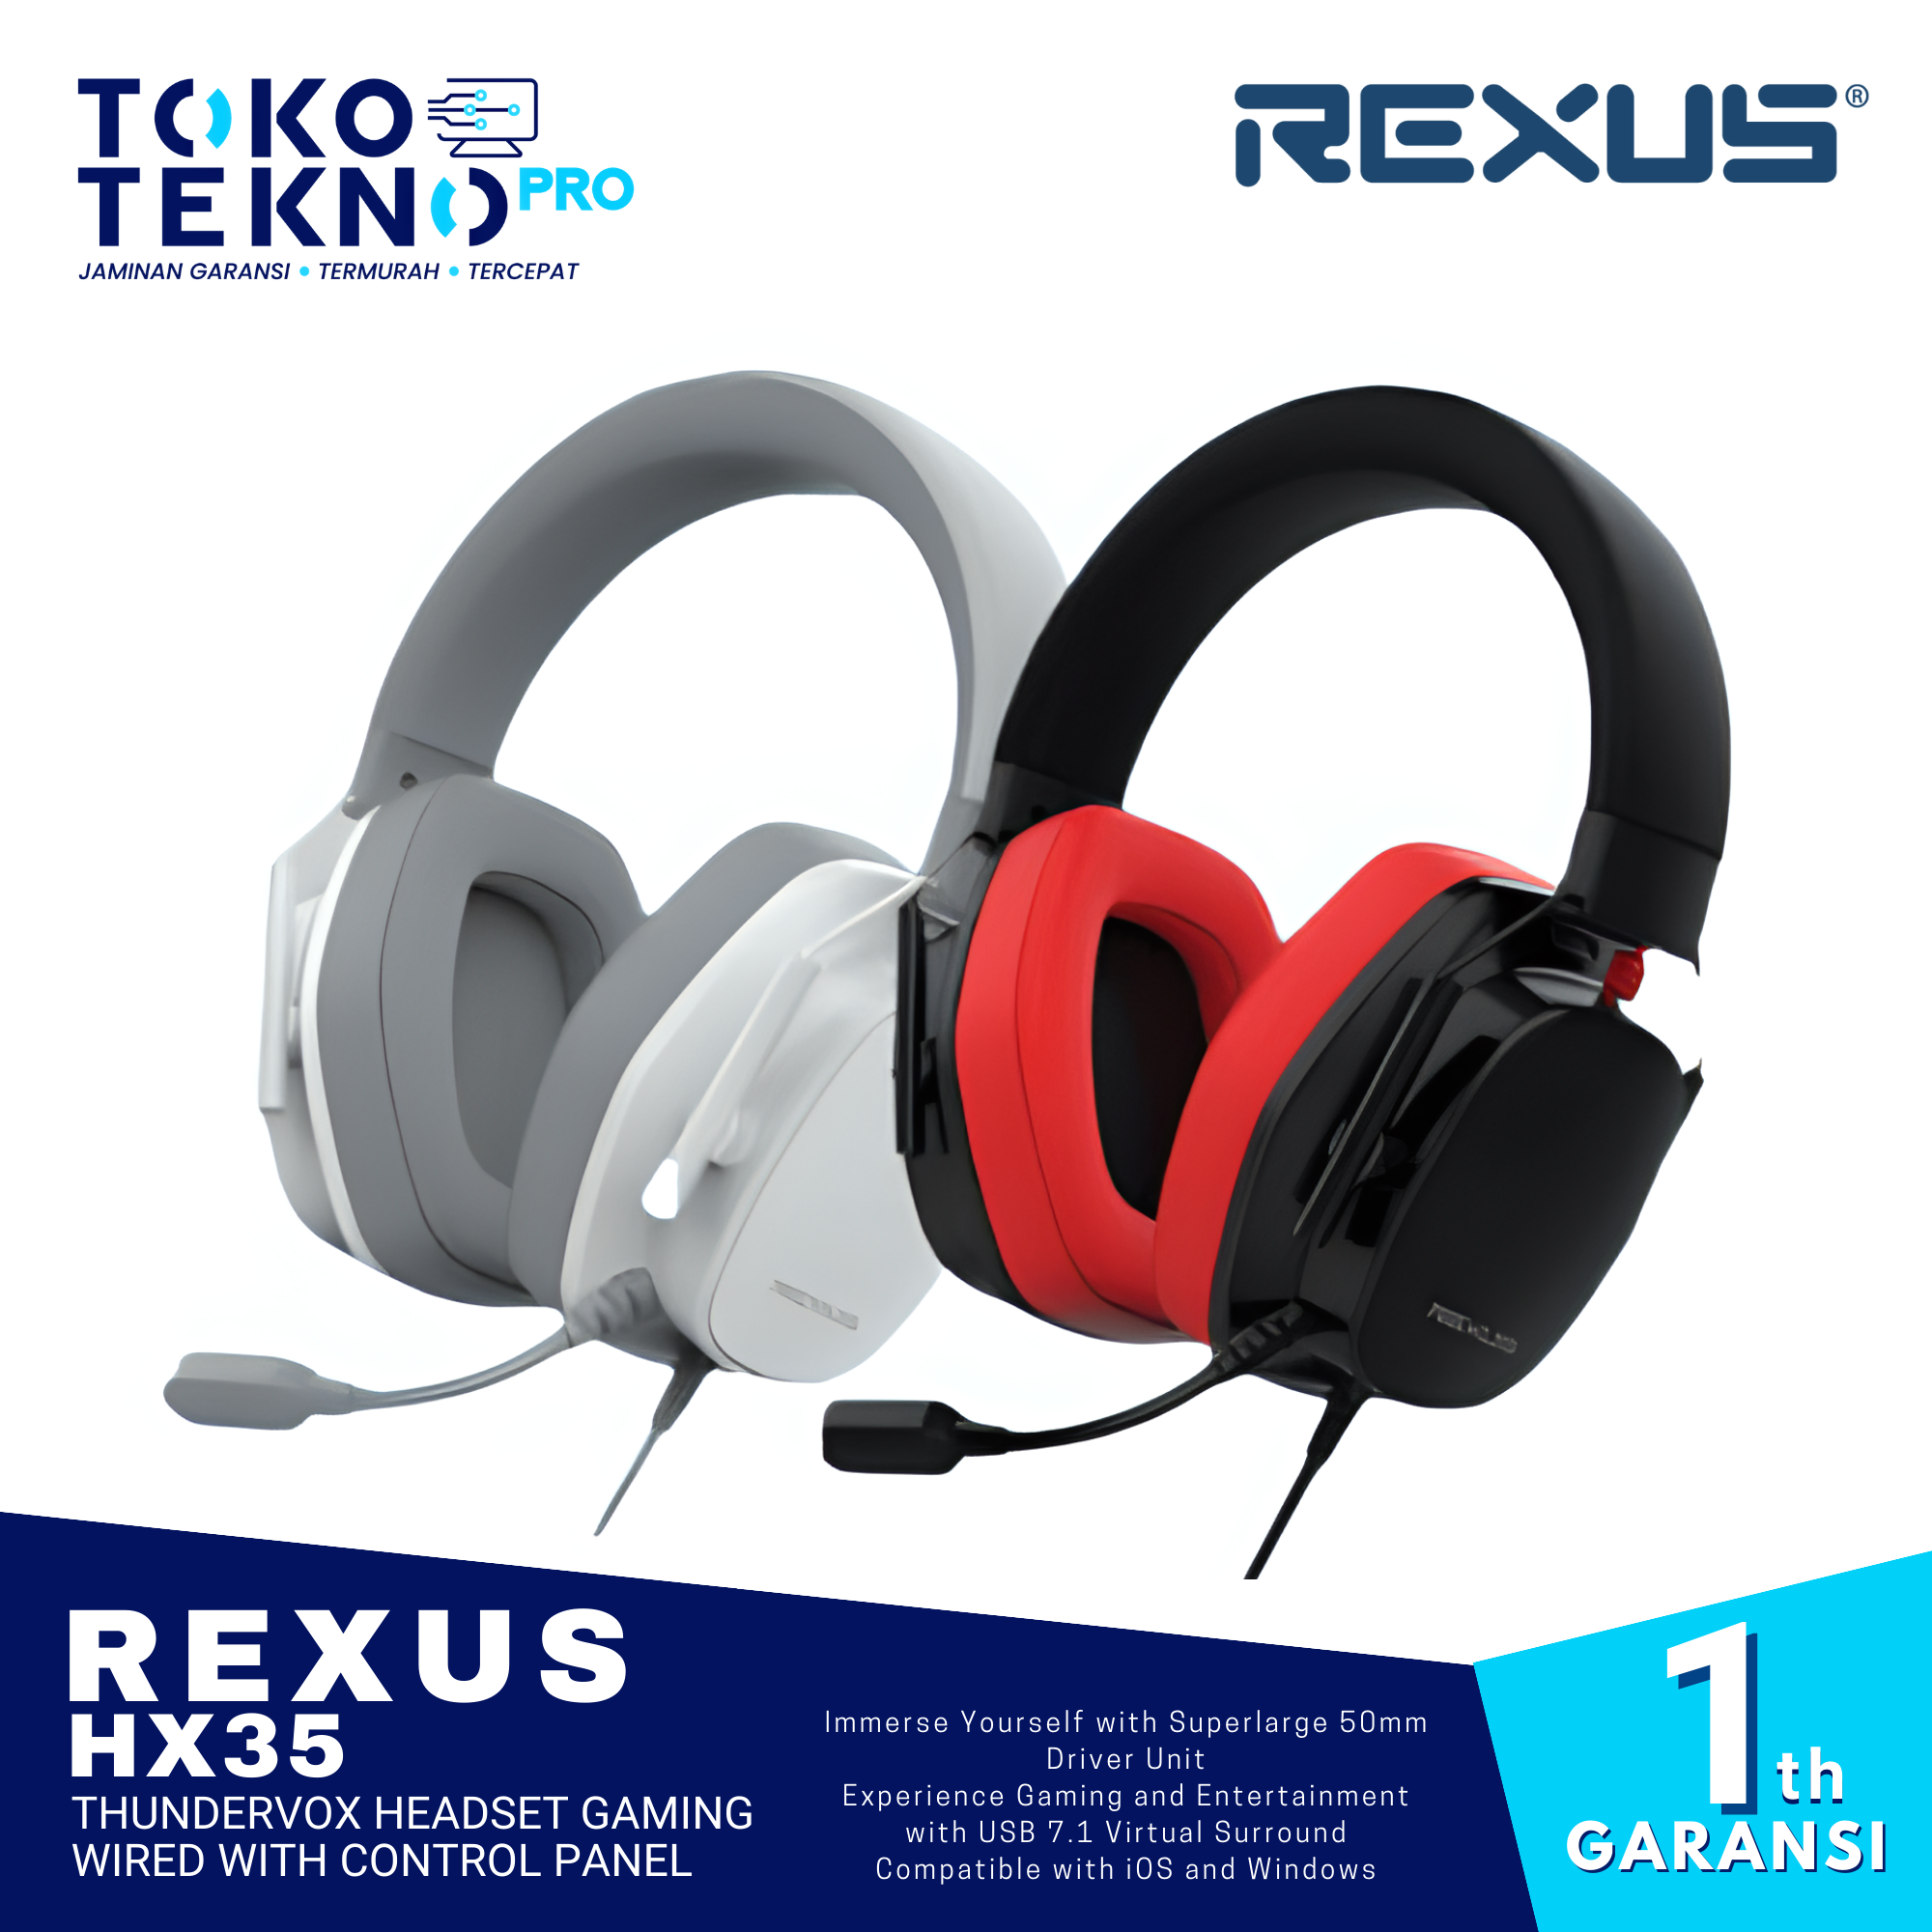 Rexus HX35 / HX-35 Thundervox Headset Gaming Wired WIth Control Panel